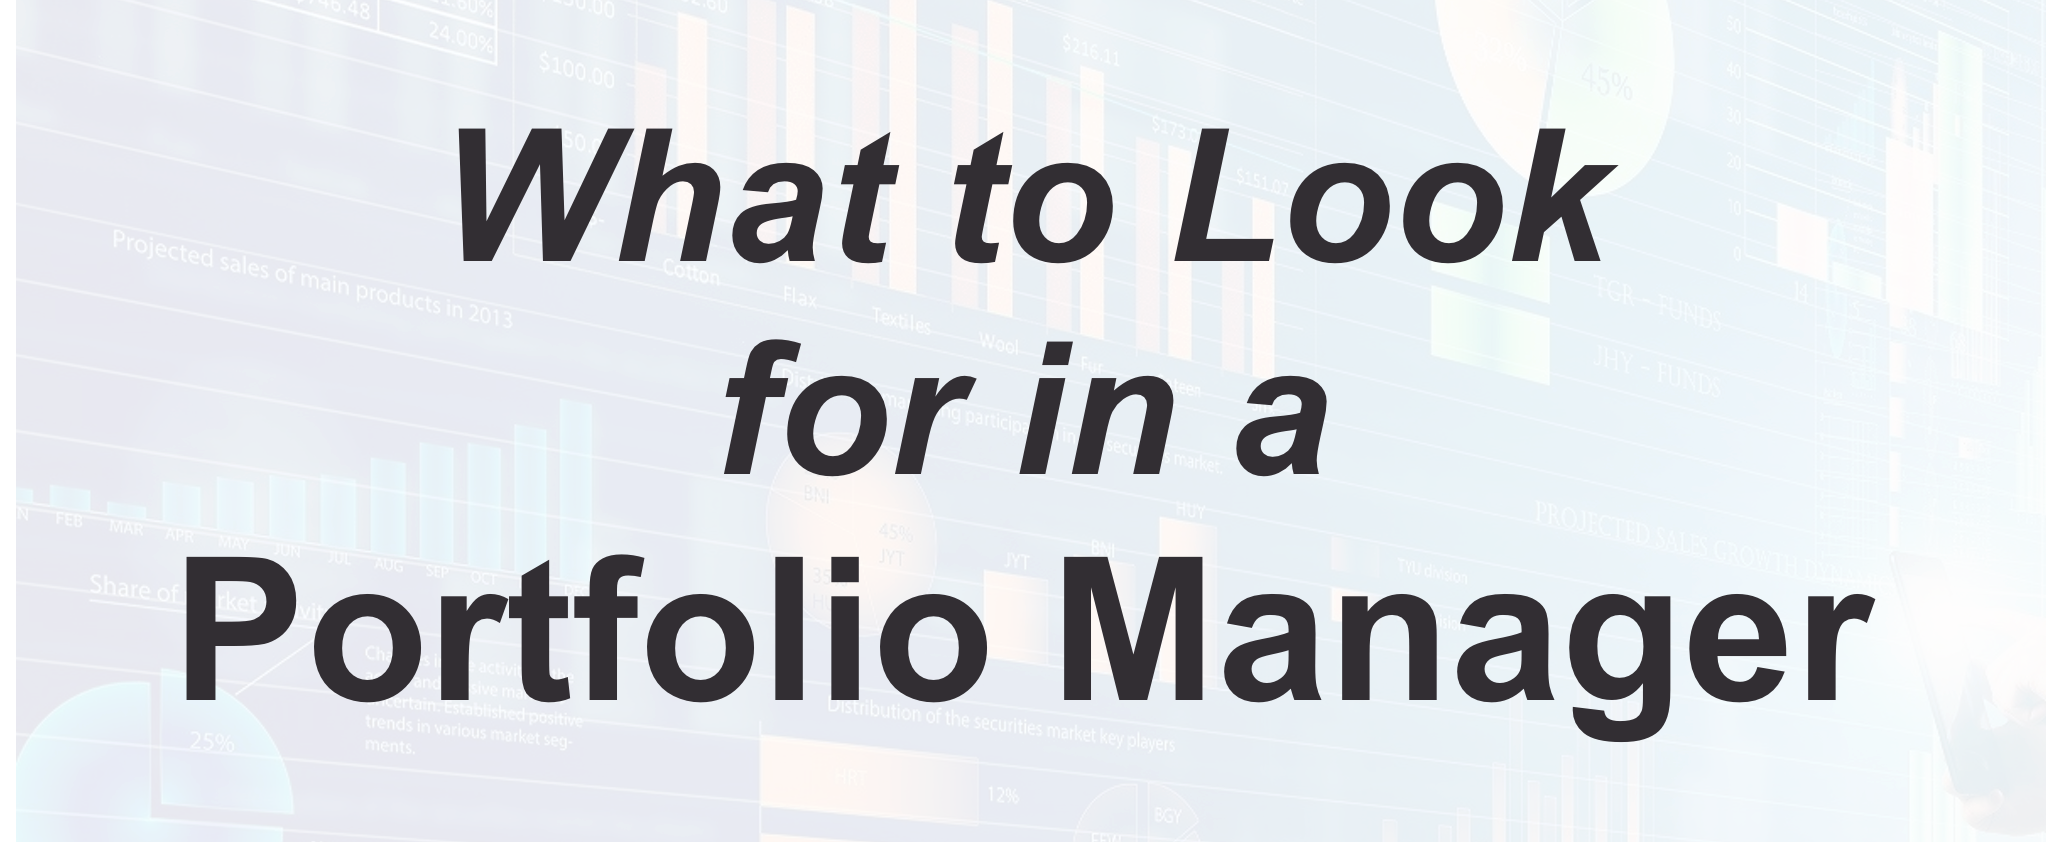 What to Look for in a Portfolio Manager